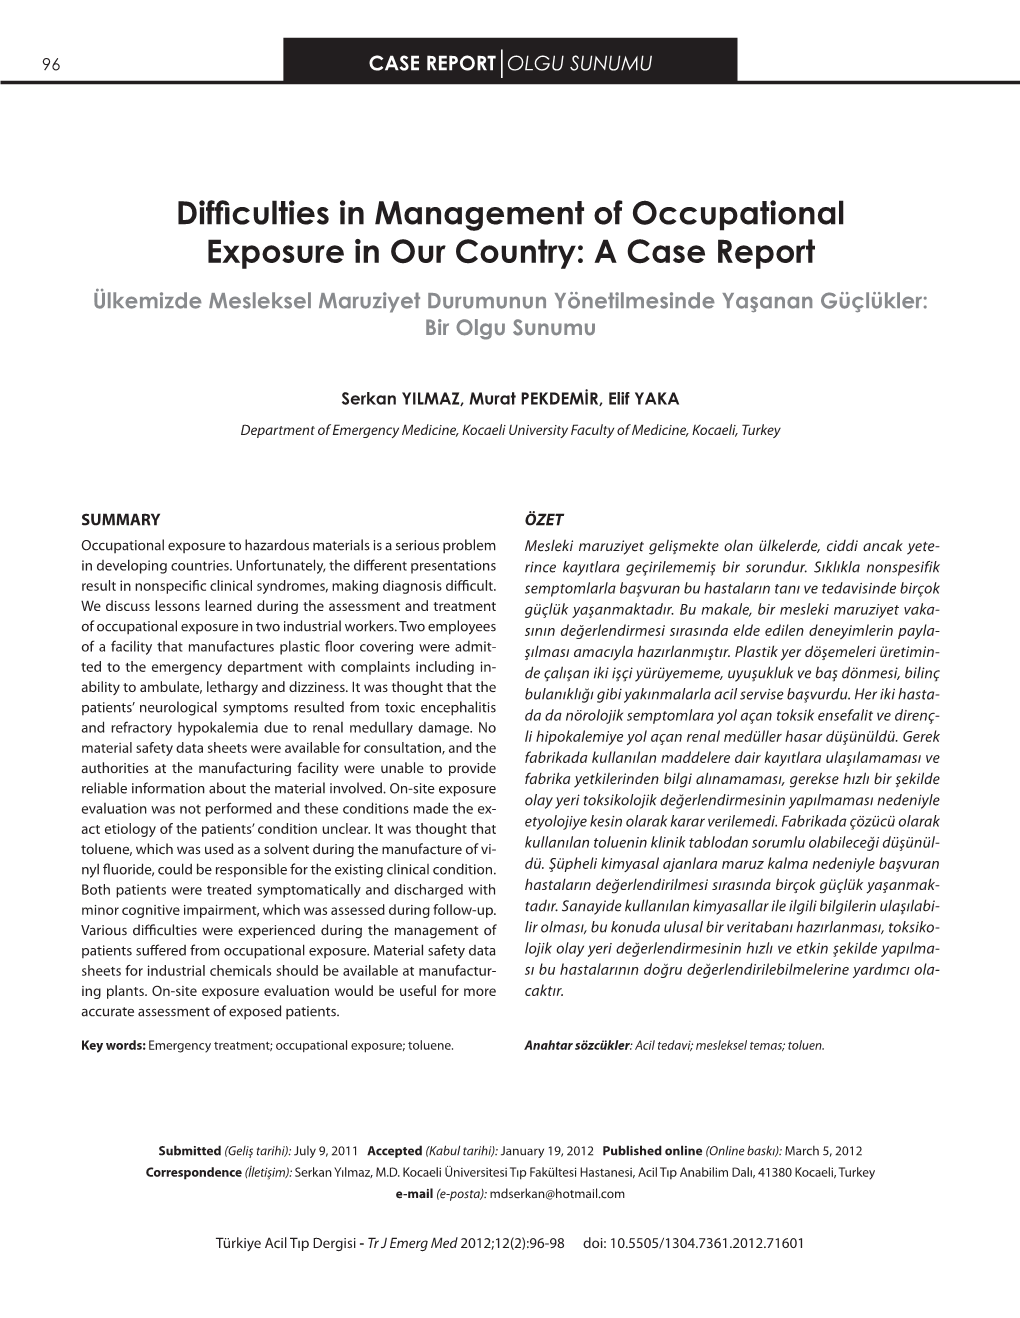 Difficulties in Management of Occupational Exposure in Our